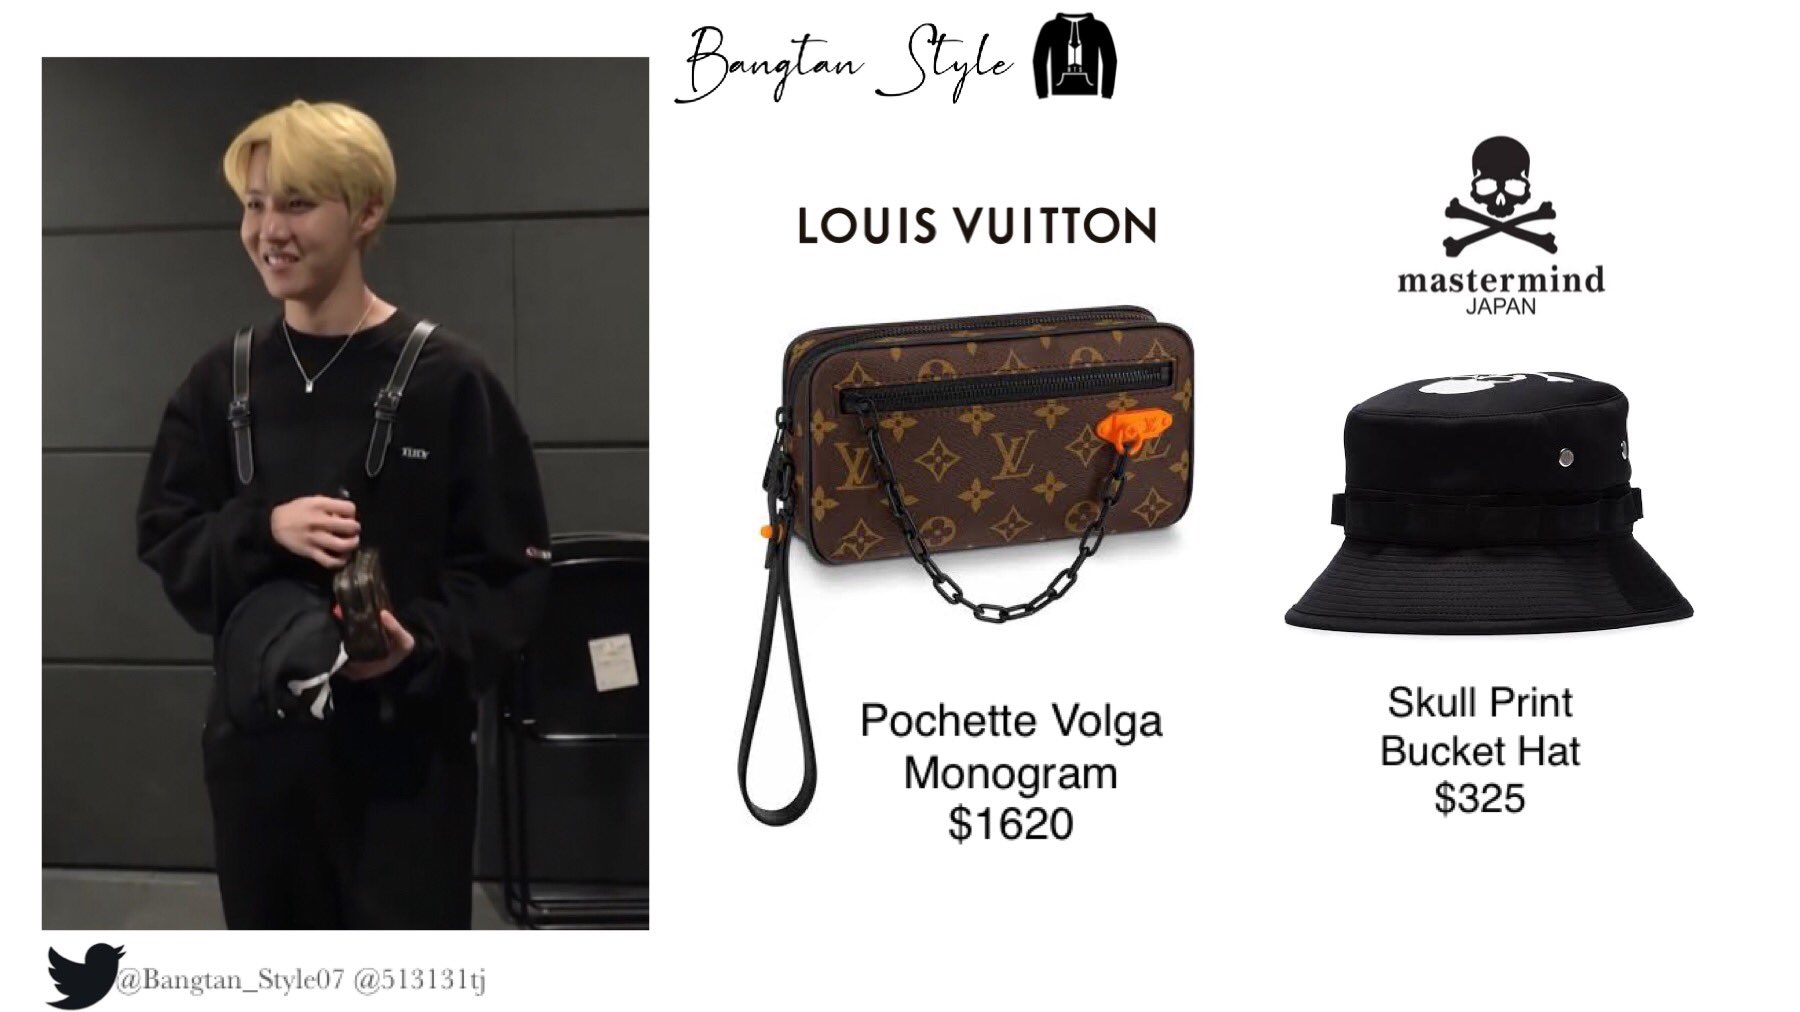 Bangtan Style⁷ (slow) on X: Lee Hyun  Hyeoni Combo TV [Louis Vuitton,  Mastermind, Thom Browne, CHK, Yinmakco] *Outfit details in the thread  #JHOPE #SUGA #JIN #JUNGKOOK #BTS @BTS_twt  / X